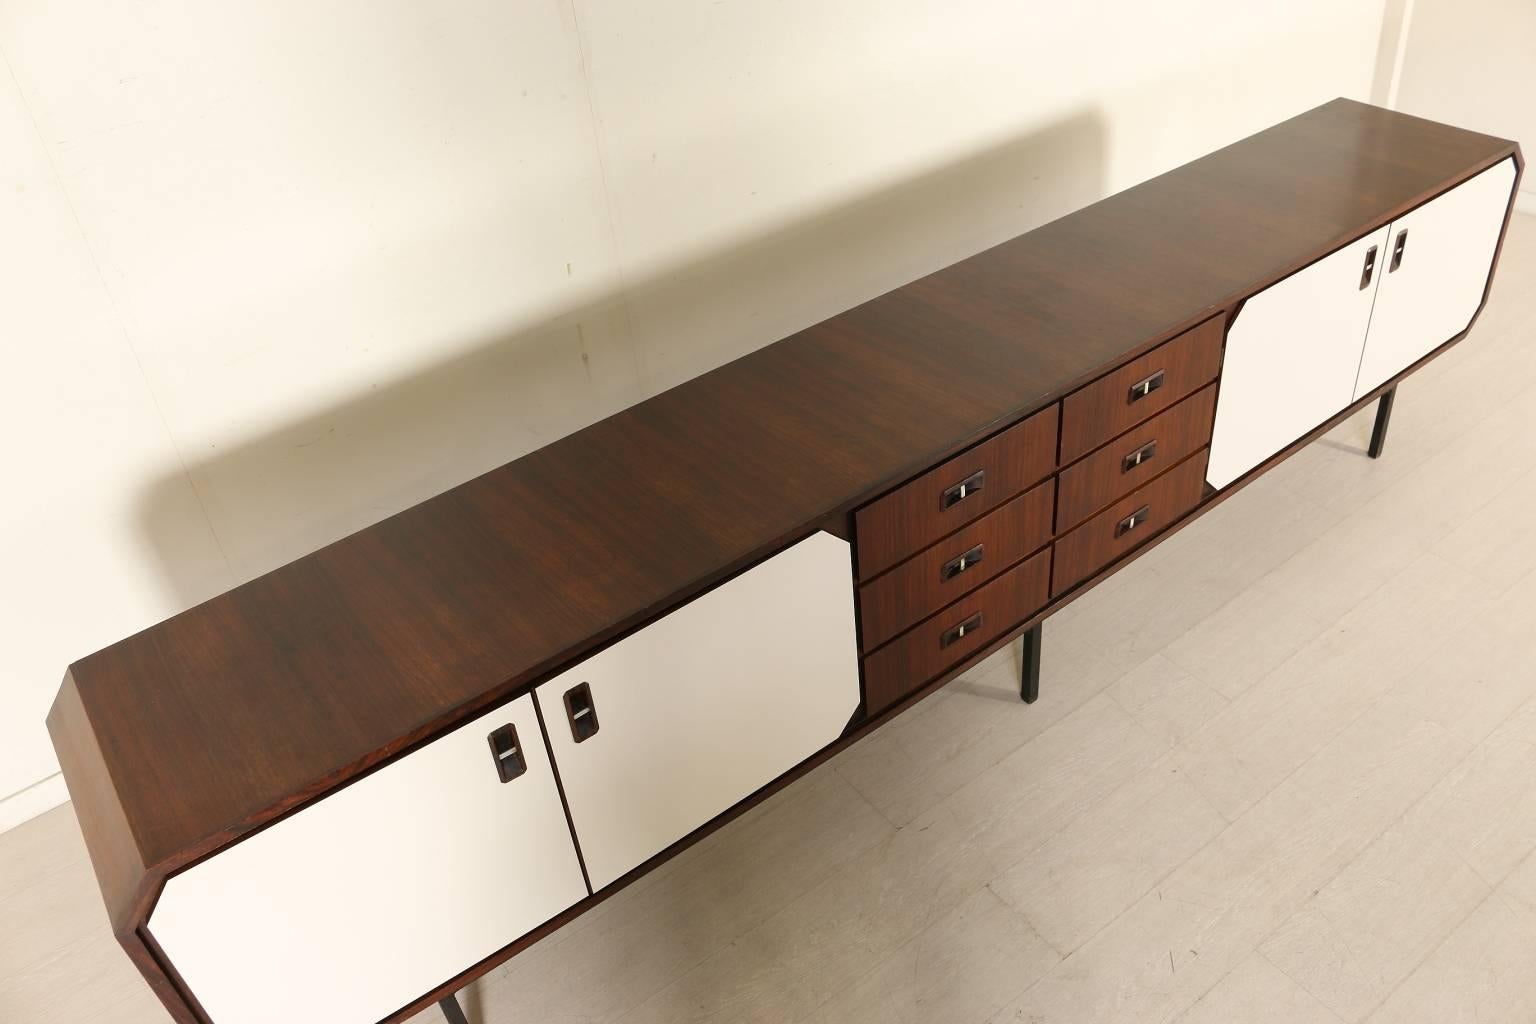 A sideboard, rosewood veneer, doors covered with Formica, metal legs. Manufactured in Italy, 1950s-1960s.